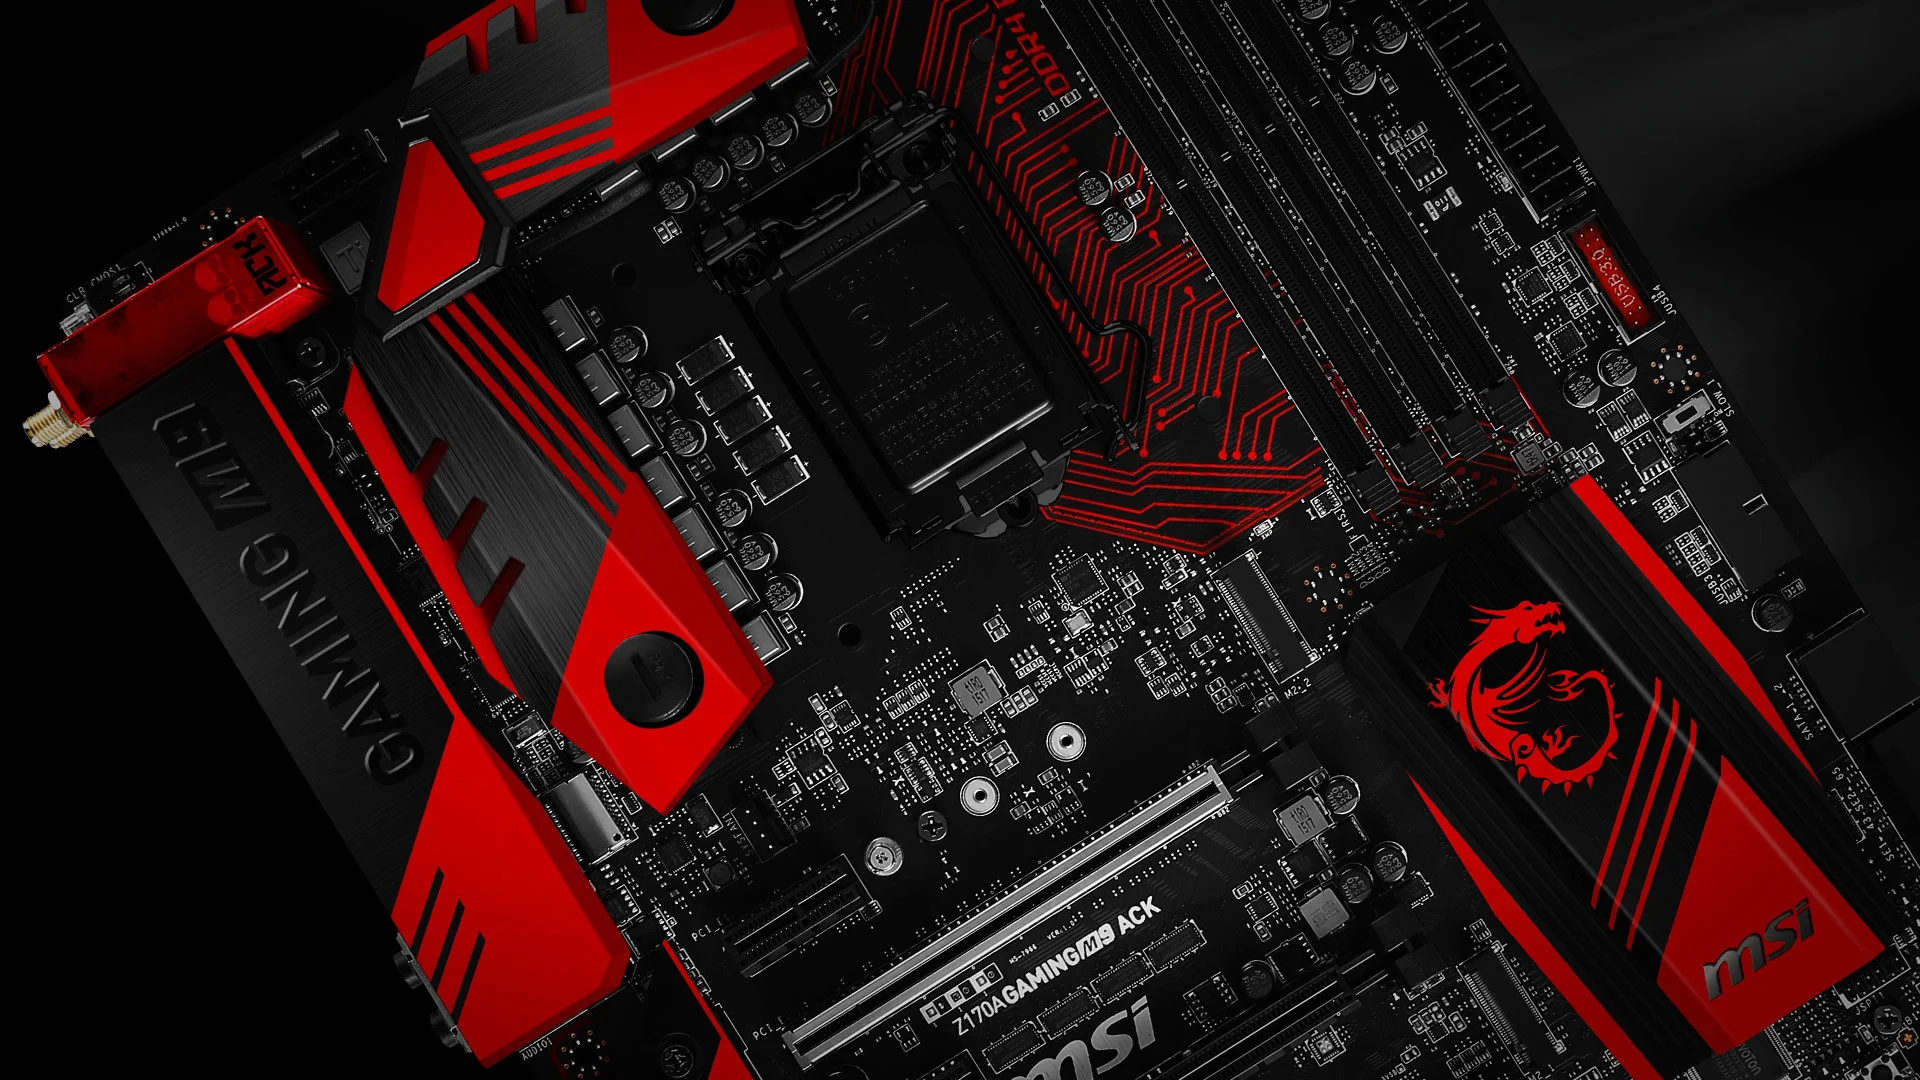 For Your Desktop: Motherboard Wallpapers, 44 Top Quality .